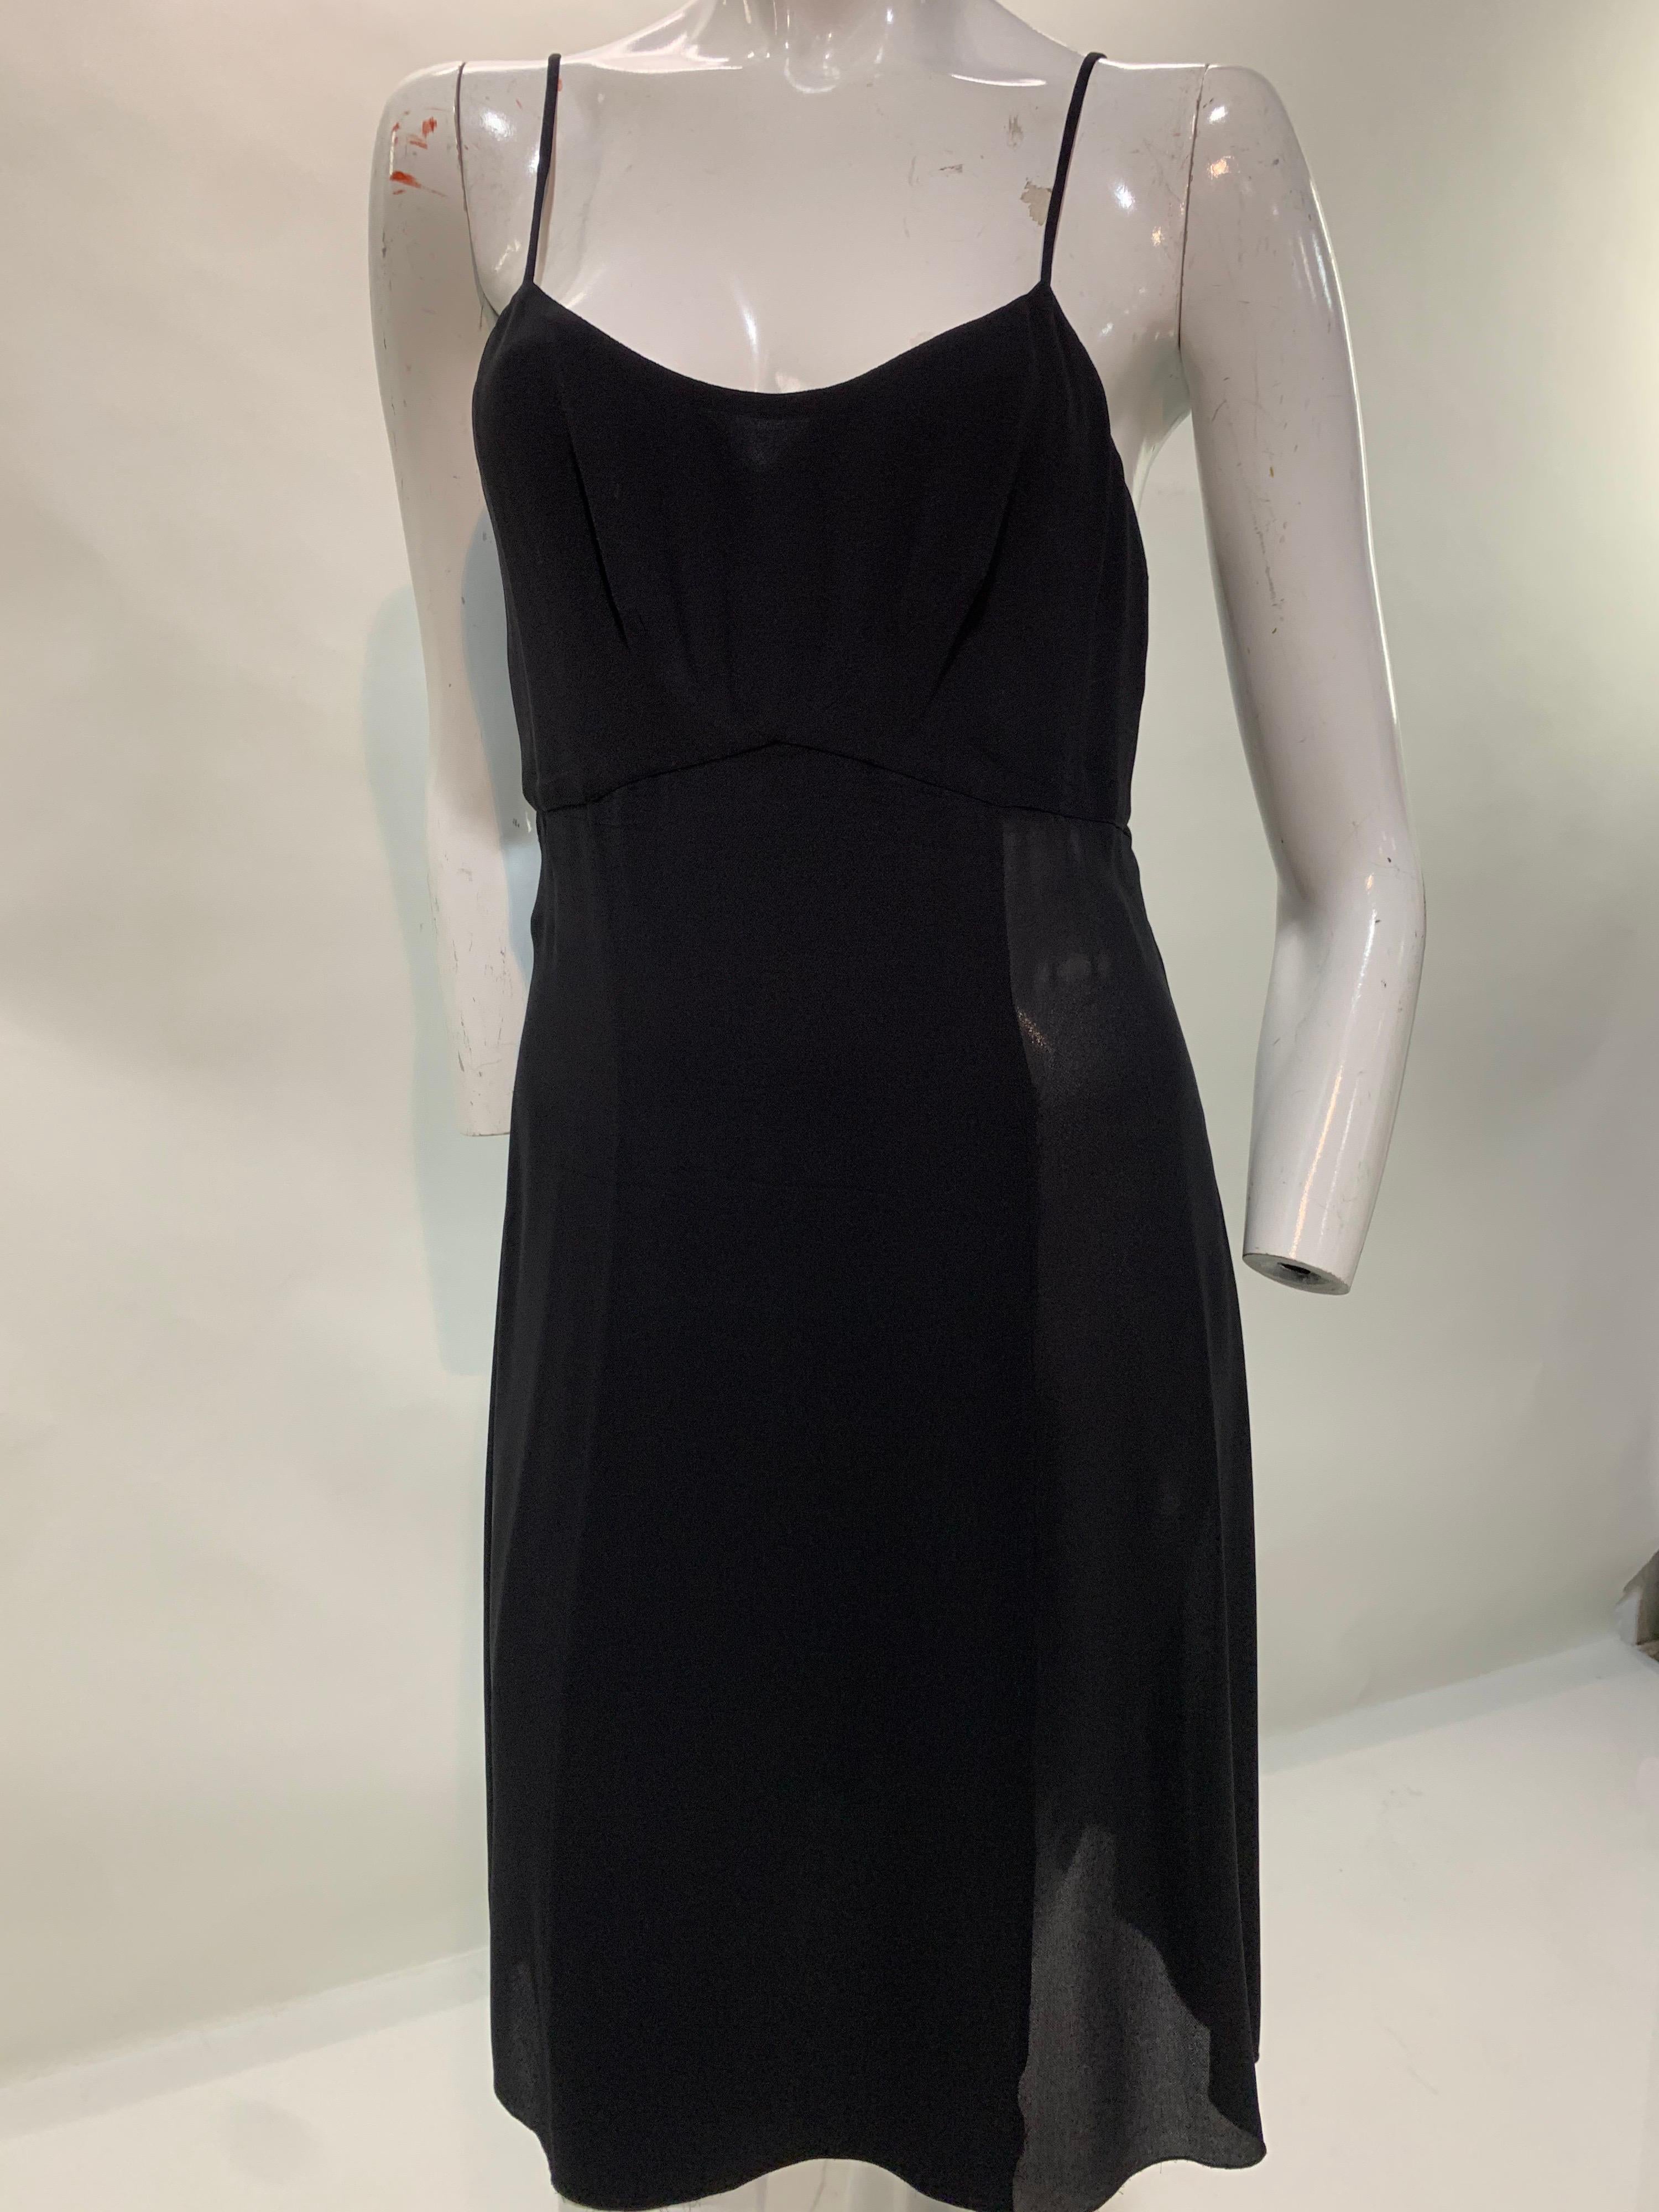 1997 Chanel by Lagerfeld Black 2-Piece Slip and Button Down Crepe Dress Ensemble 2